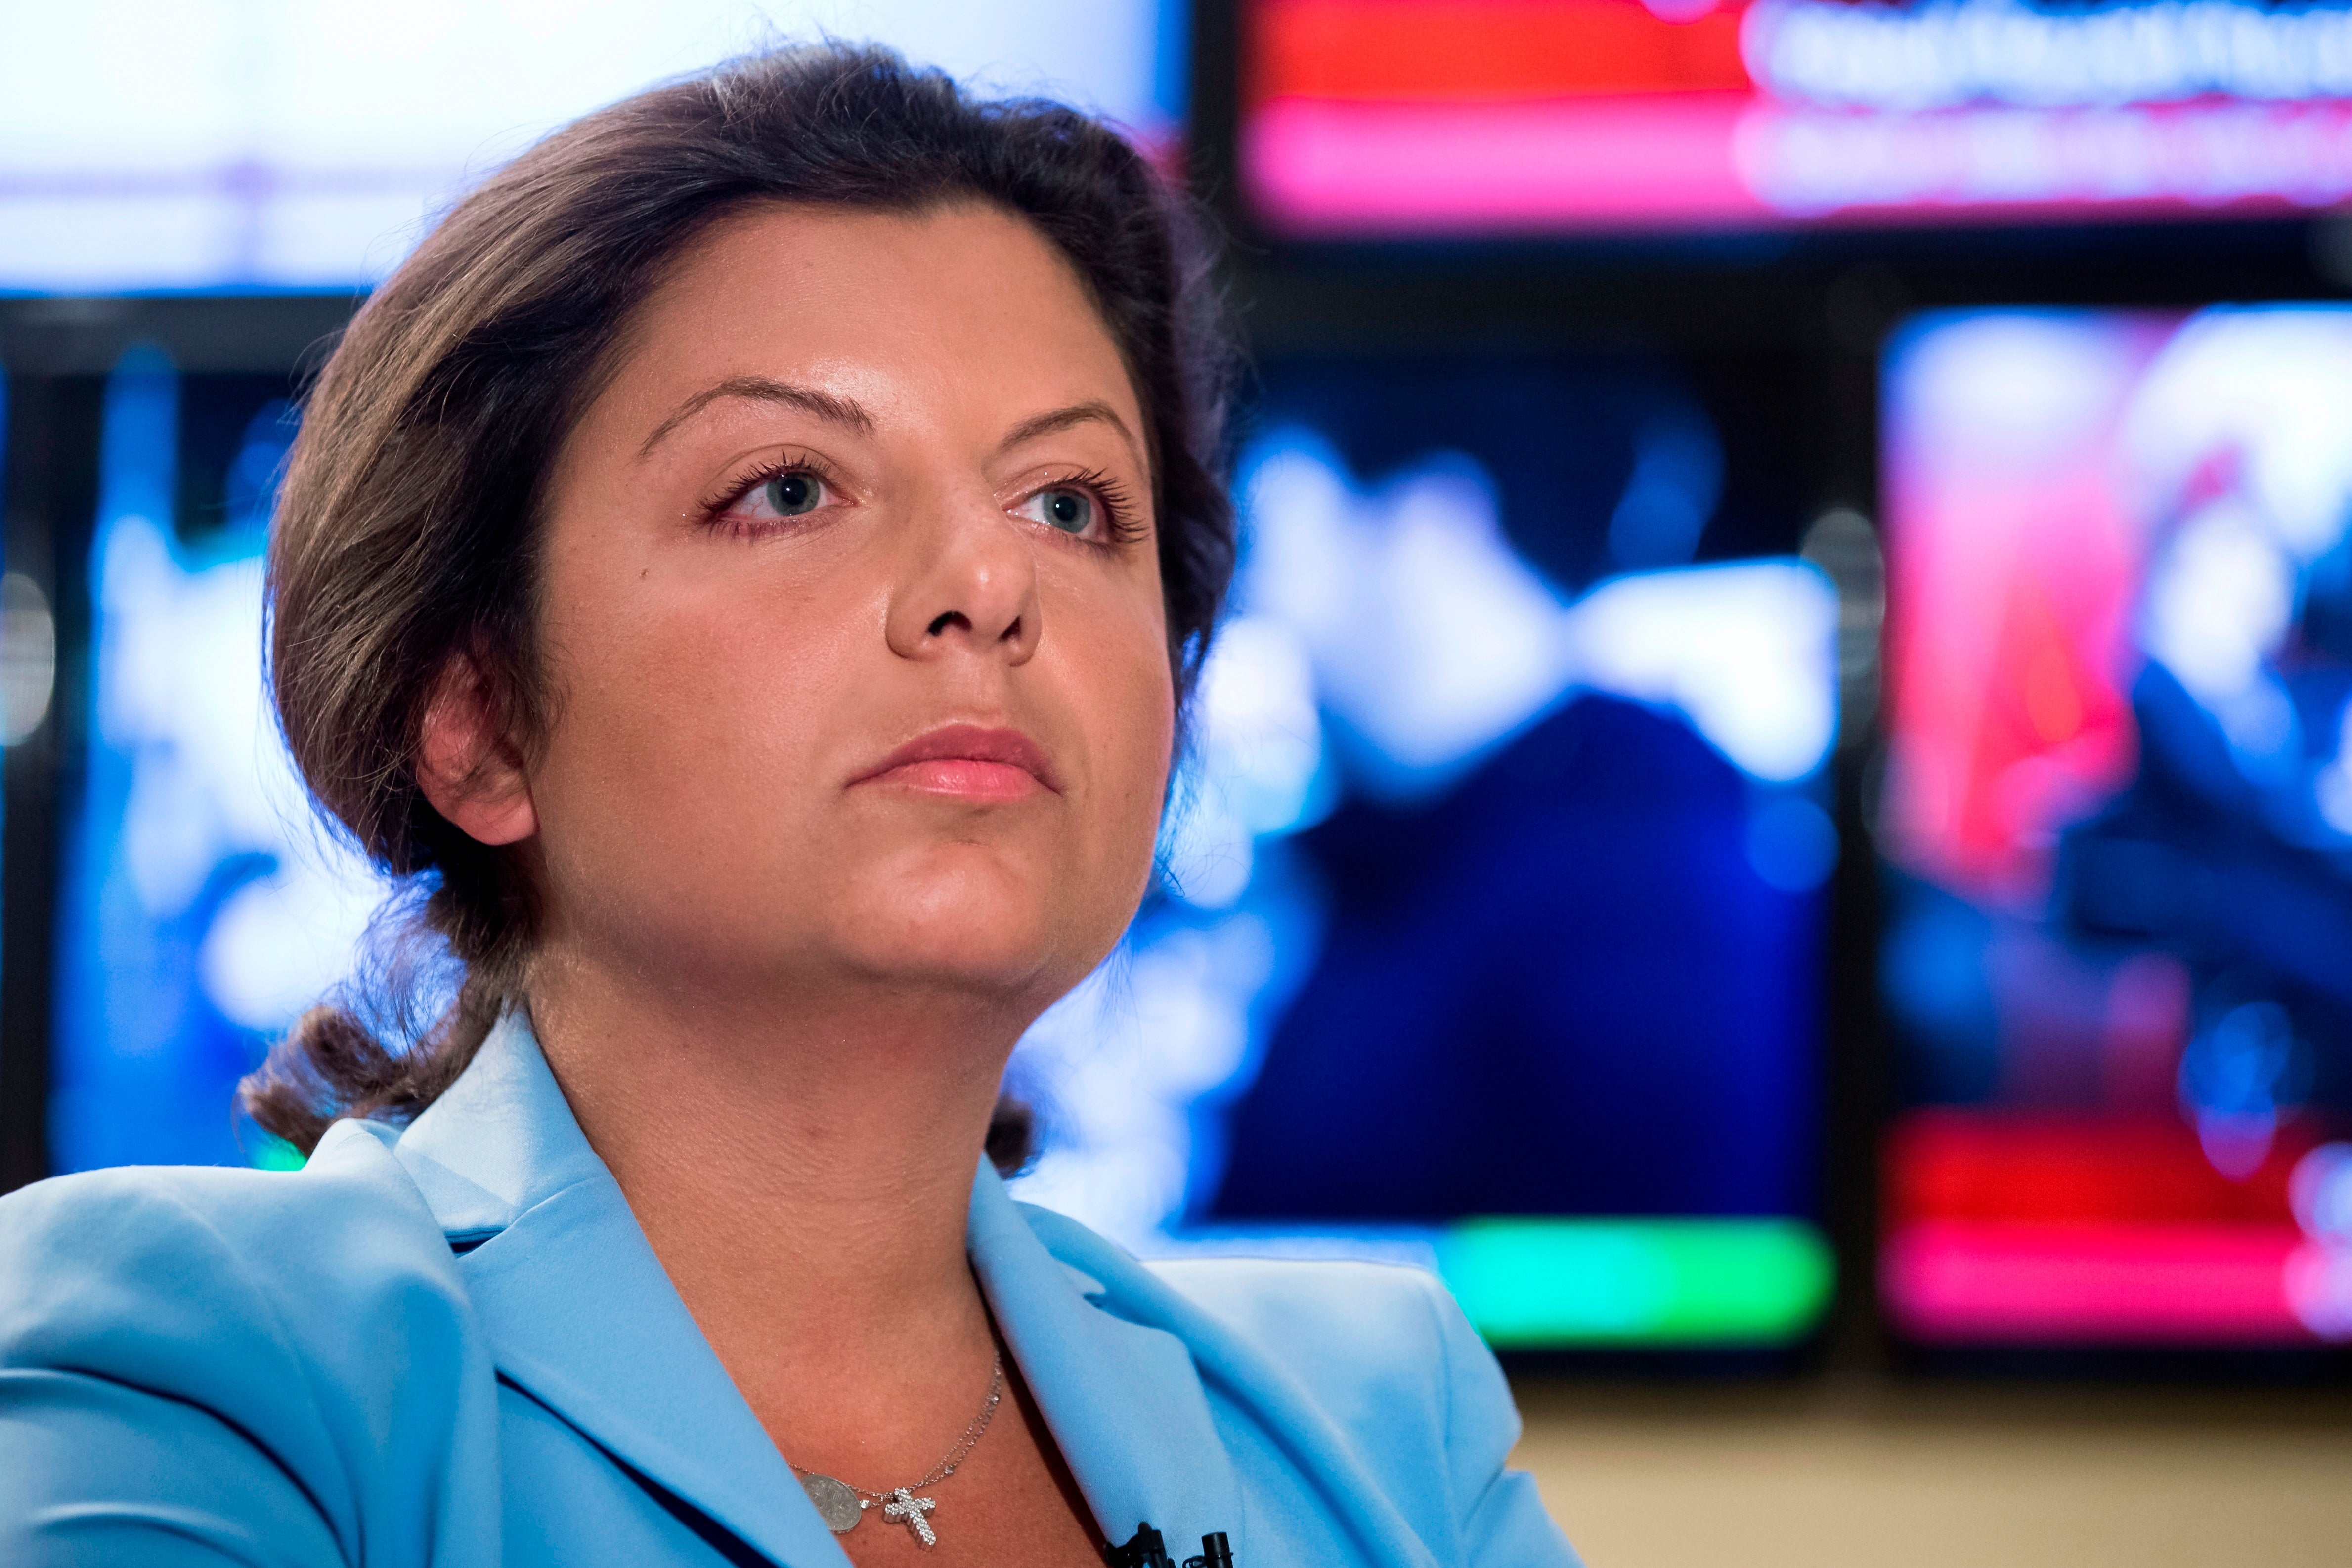 Margarita Simonyan is a prominent voice in Russian media